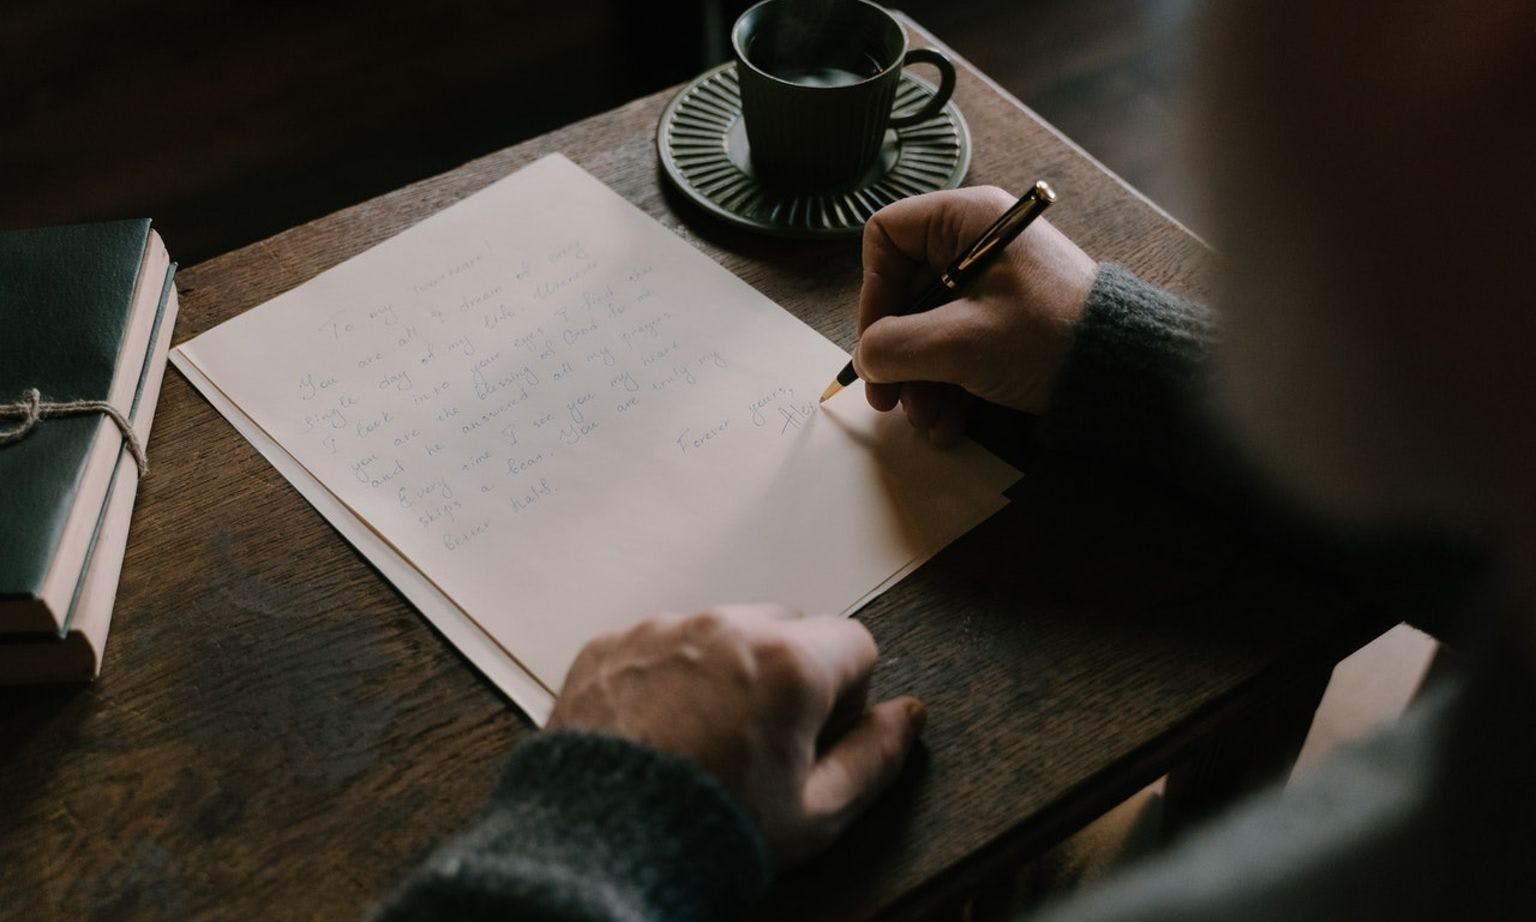 Over the shoulder image of a person writing a letter on an old wooden desk